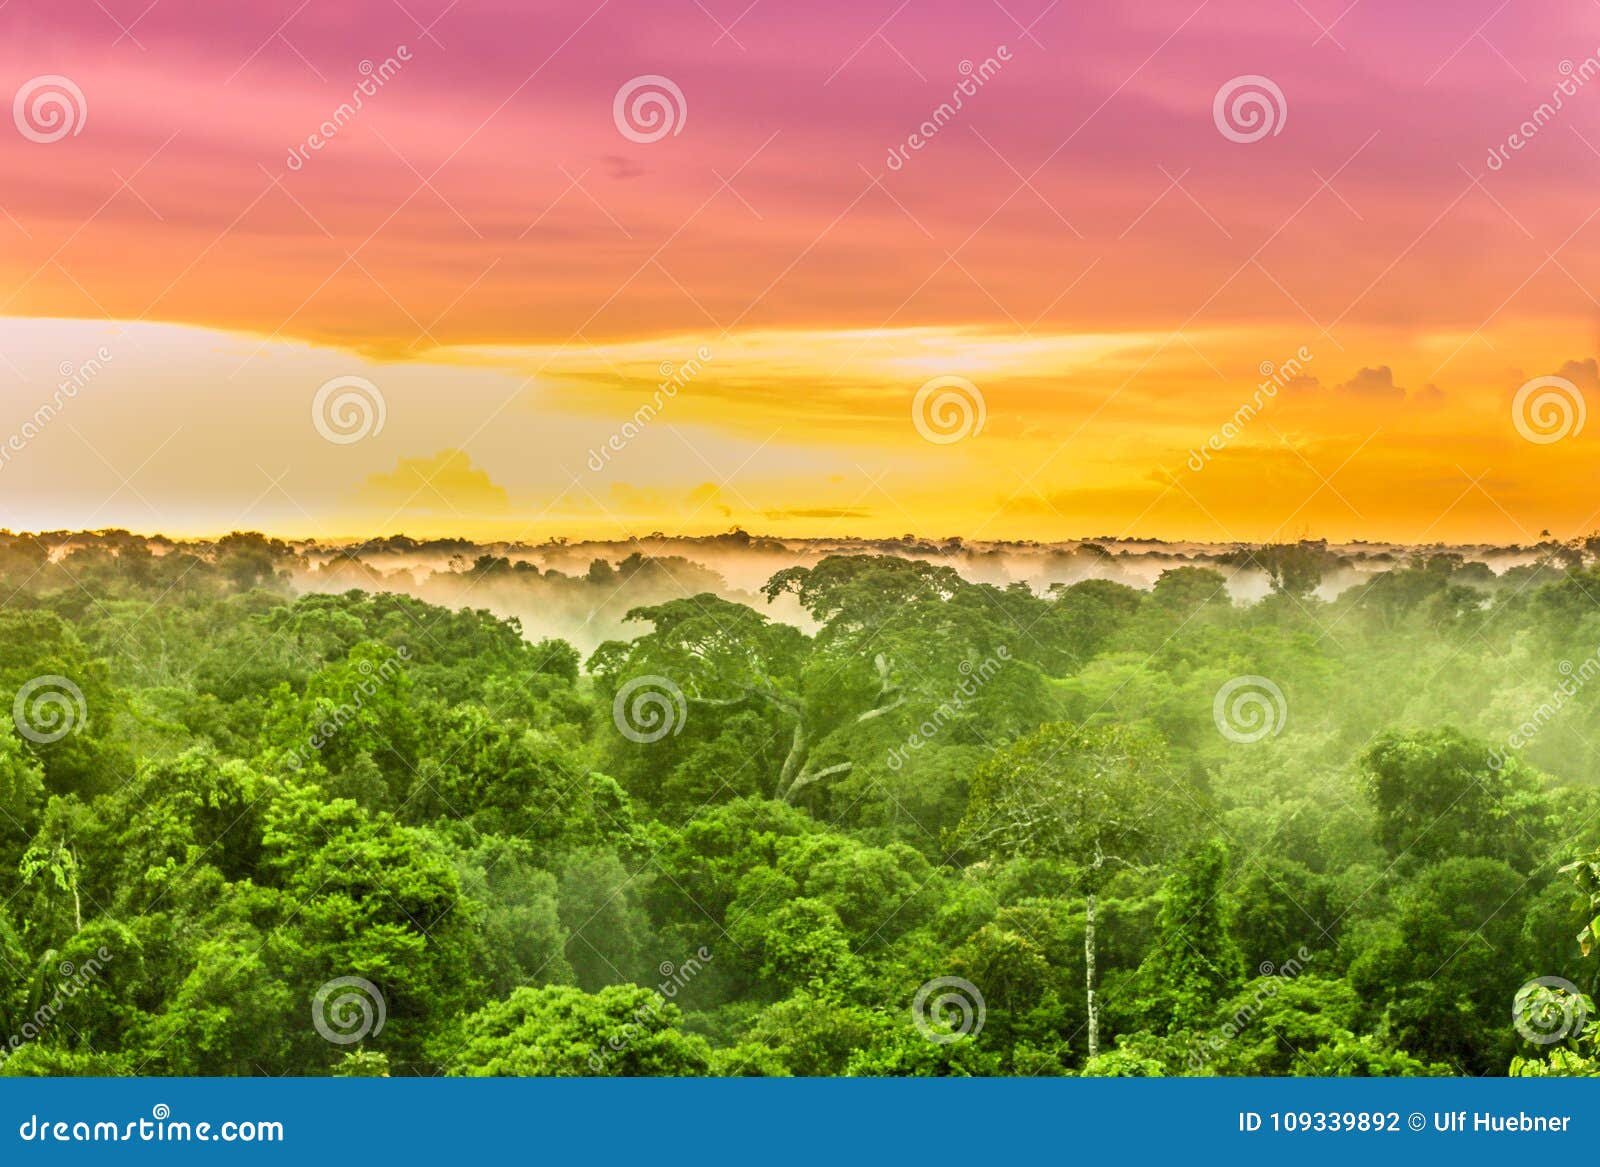 pink sunset over the amazon rain forest in brazil